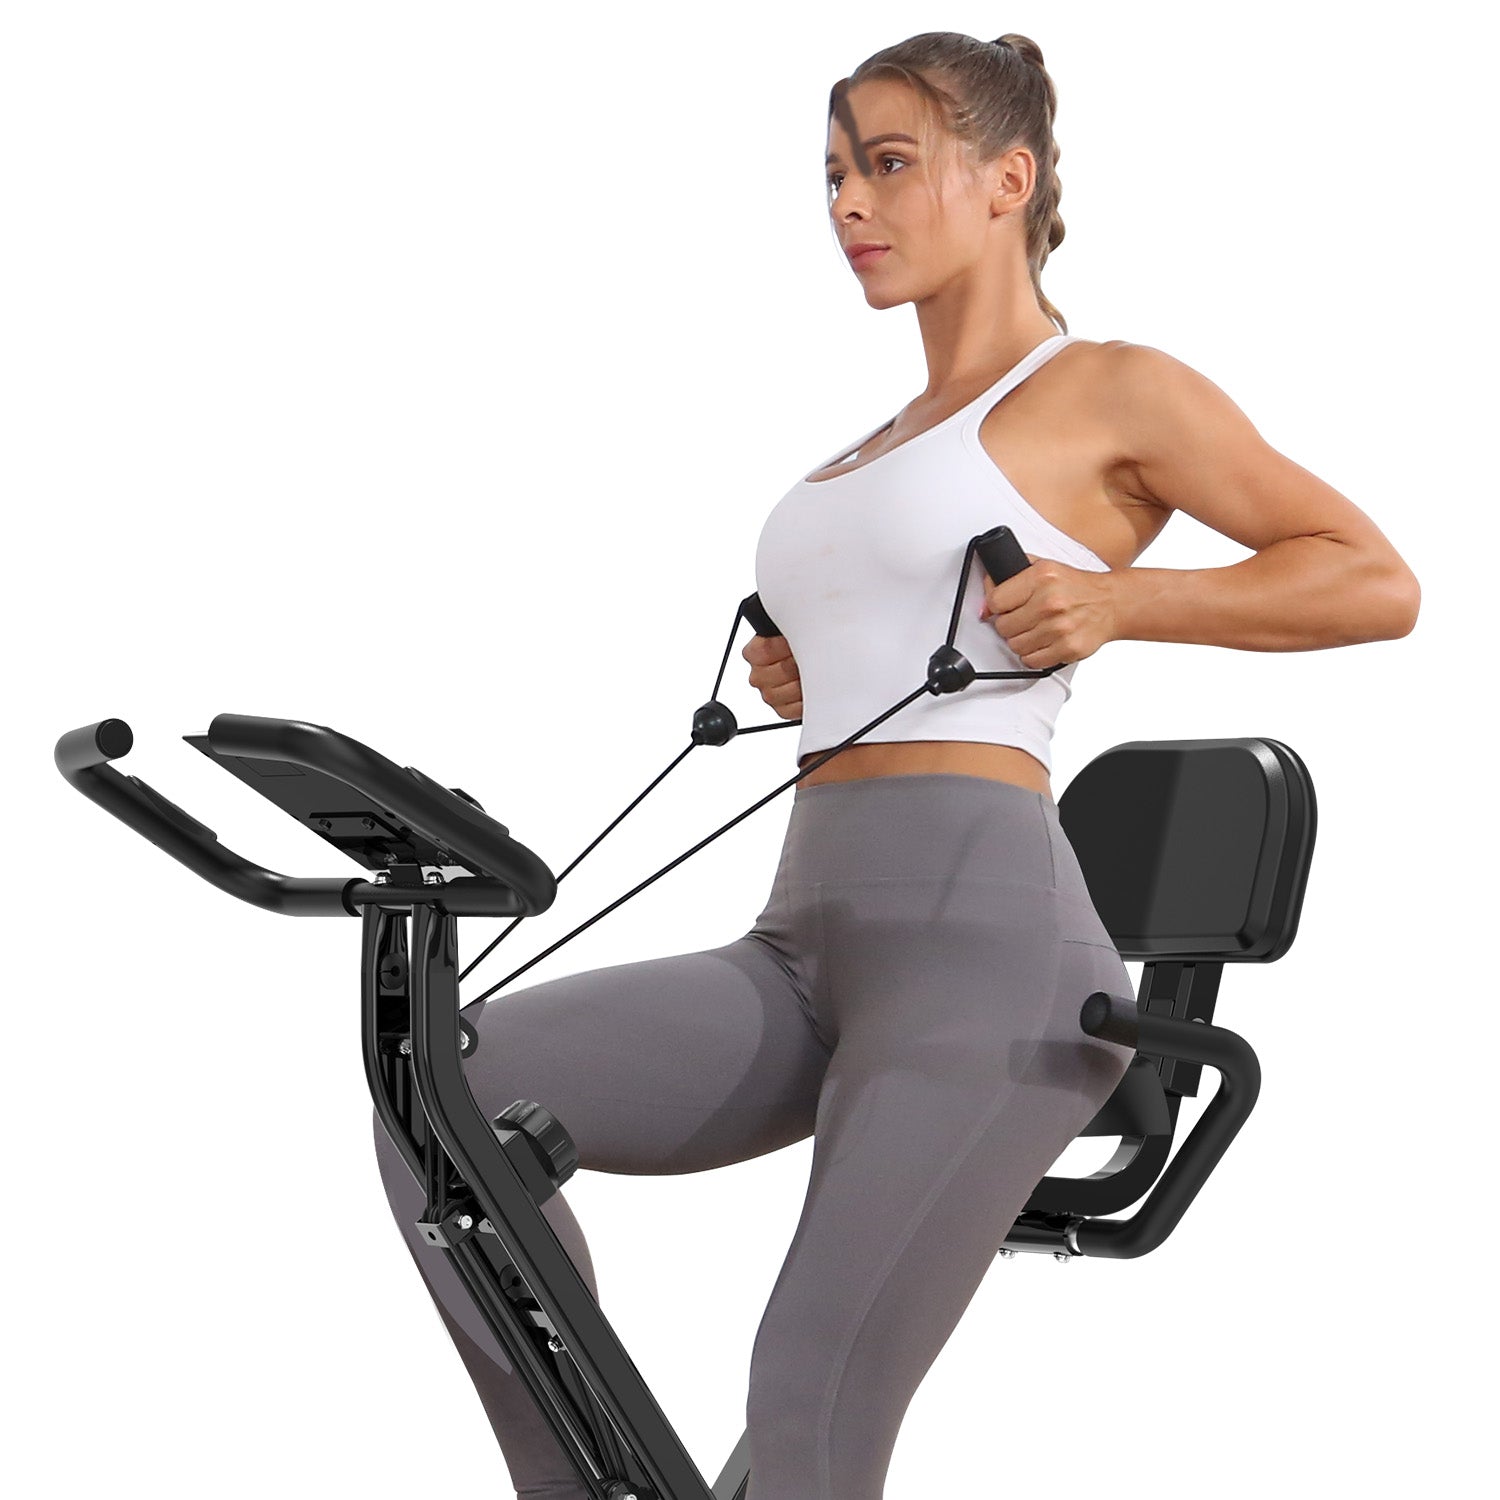 Micyox MX-600 Magnetic Foldable Indoor Cycling Bike